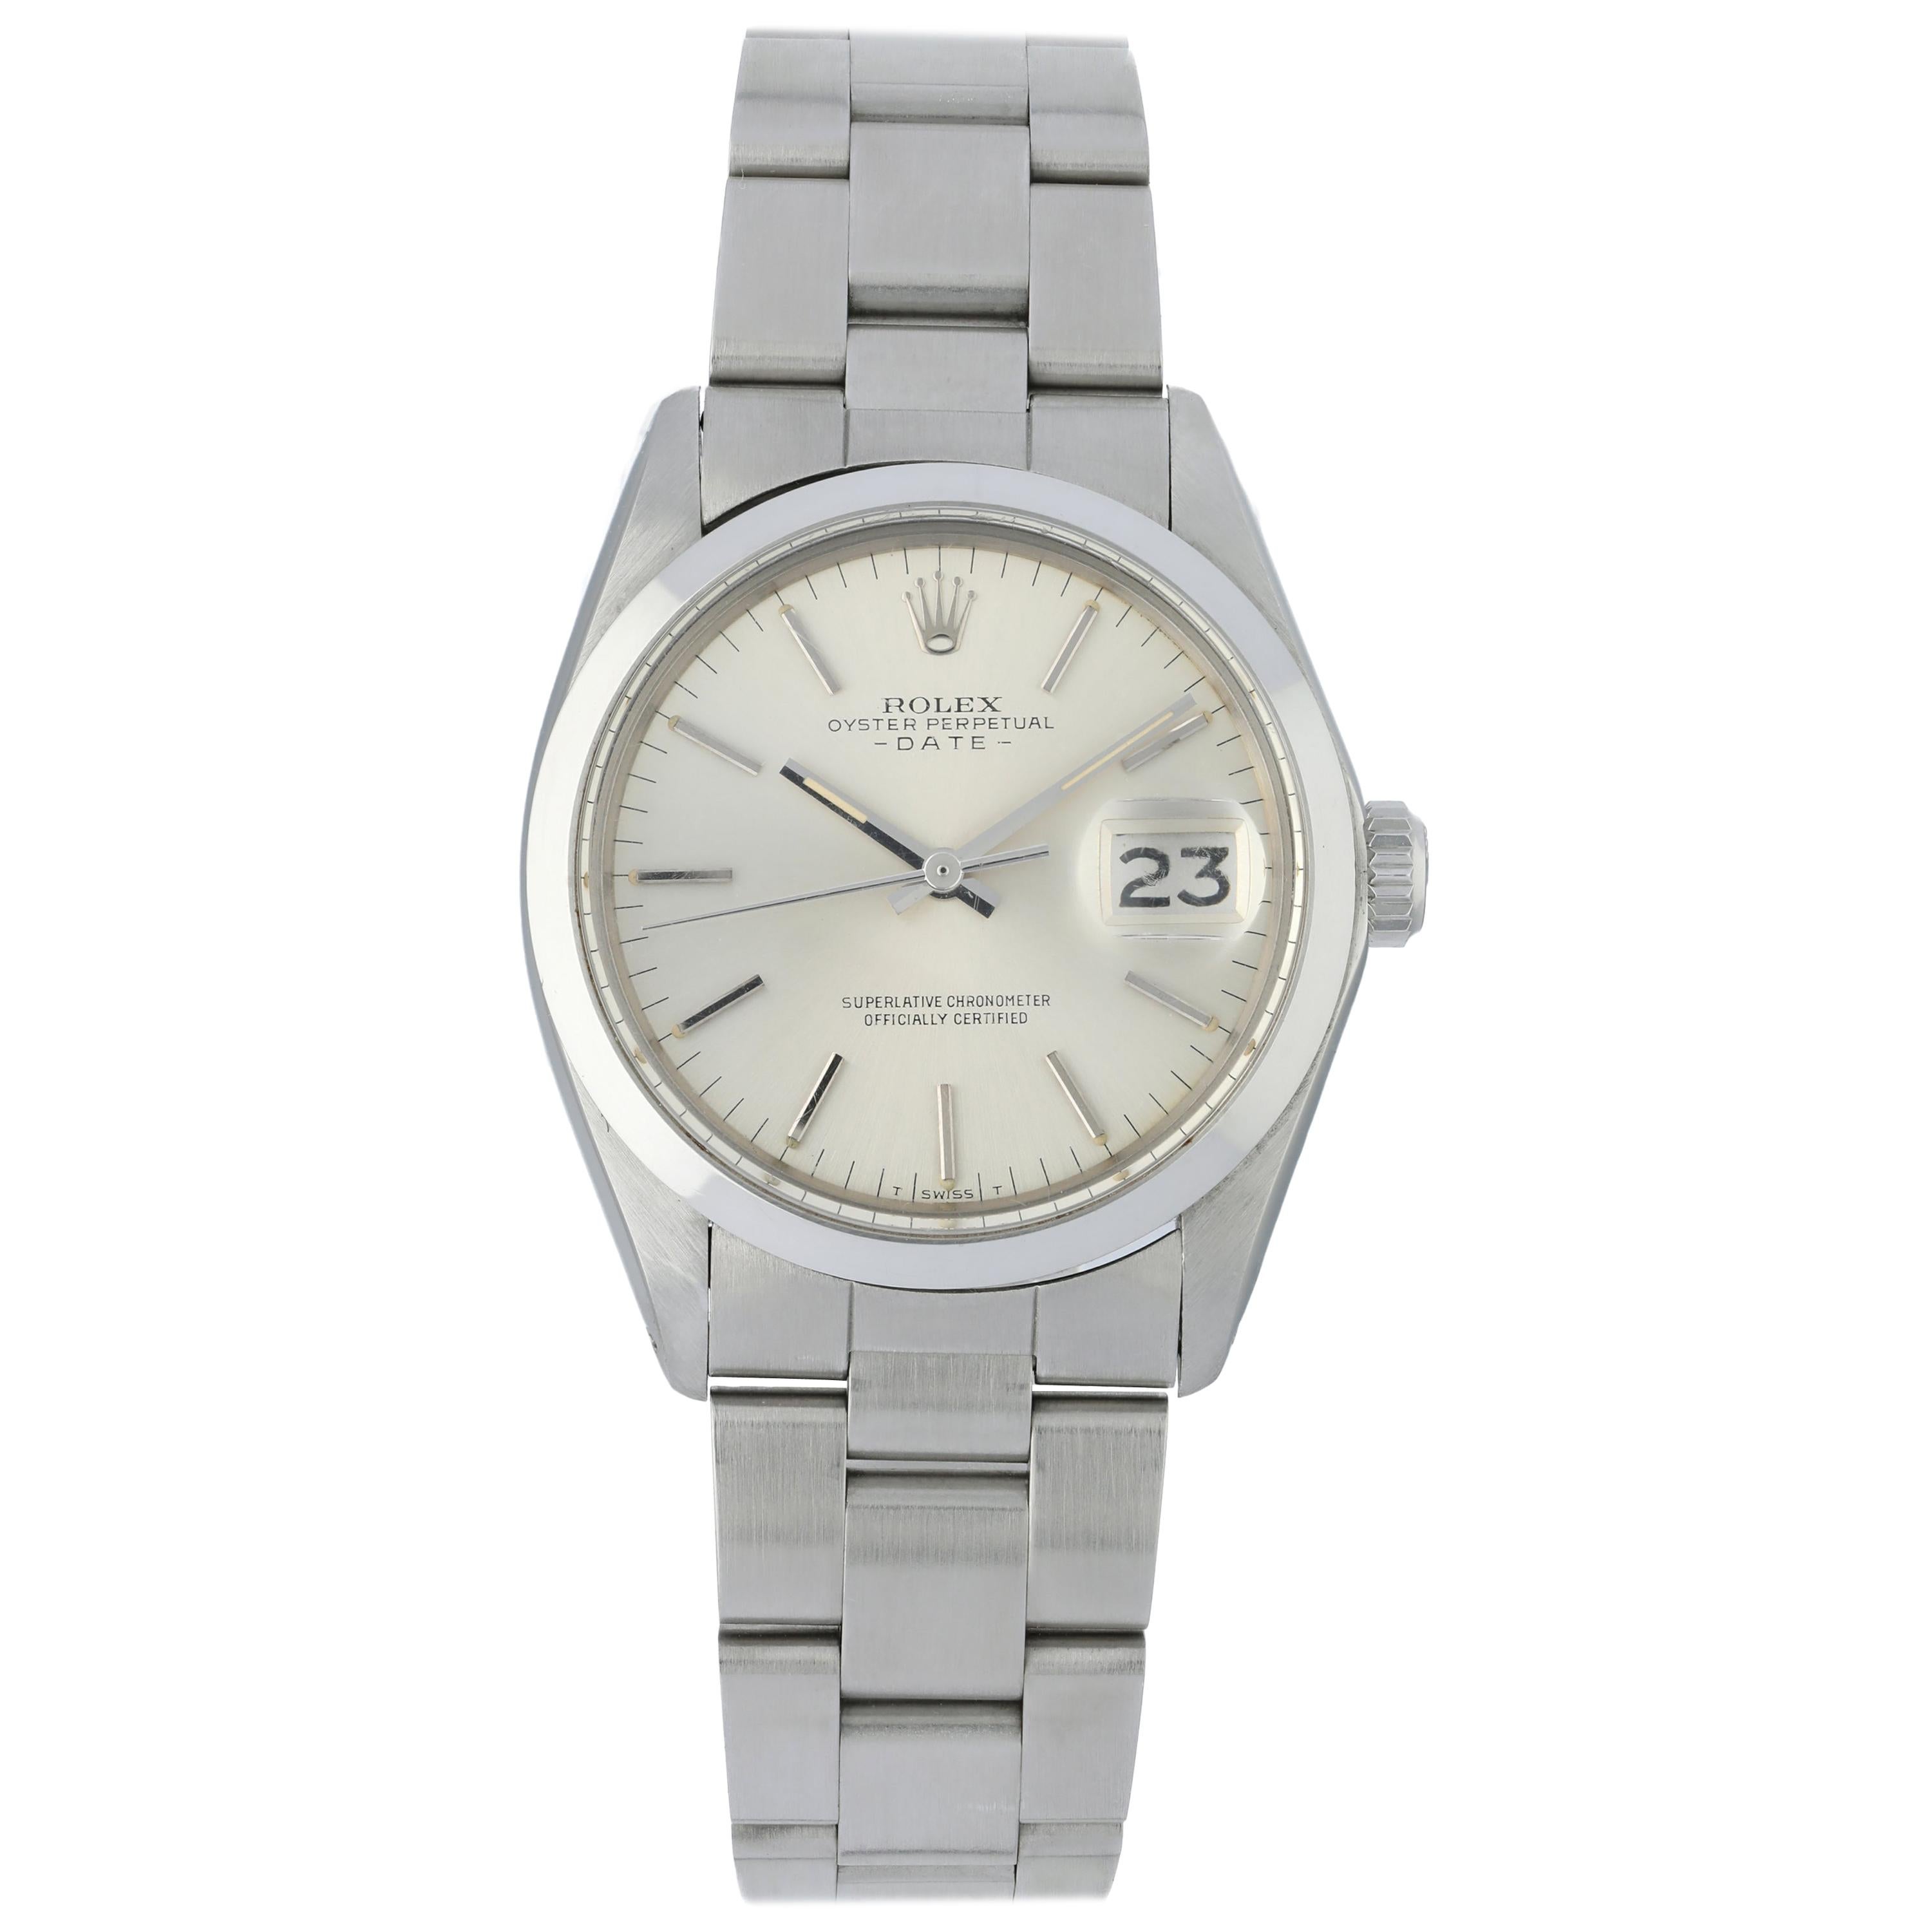 Rolex Oyster Perpetual Date 1500 Men's Watch For Sale